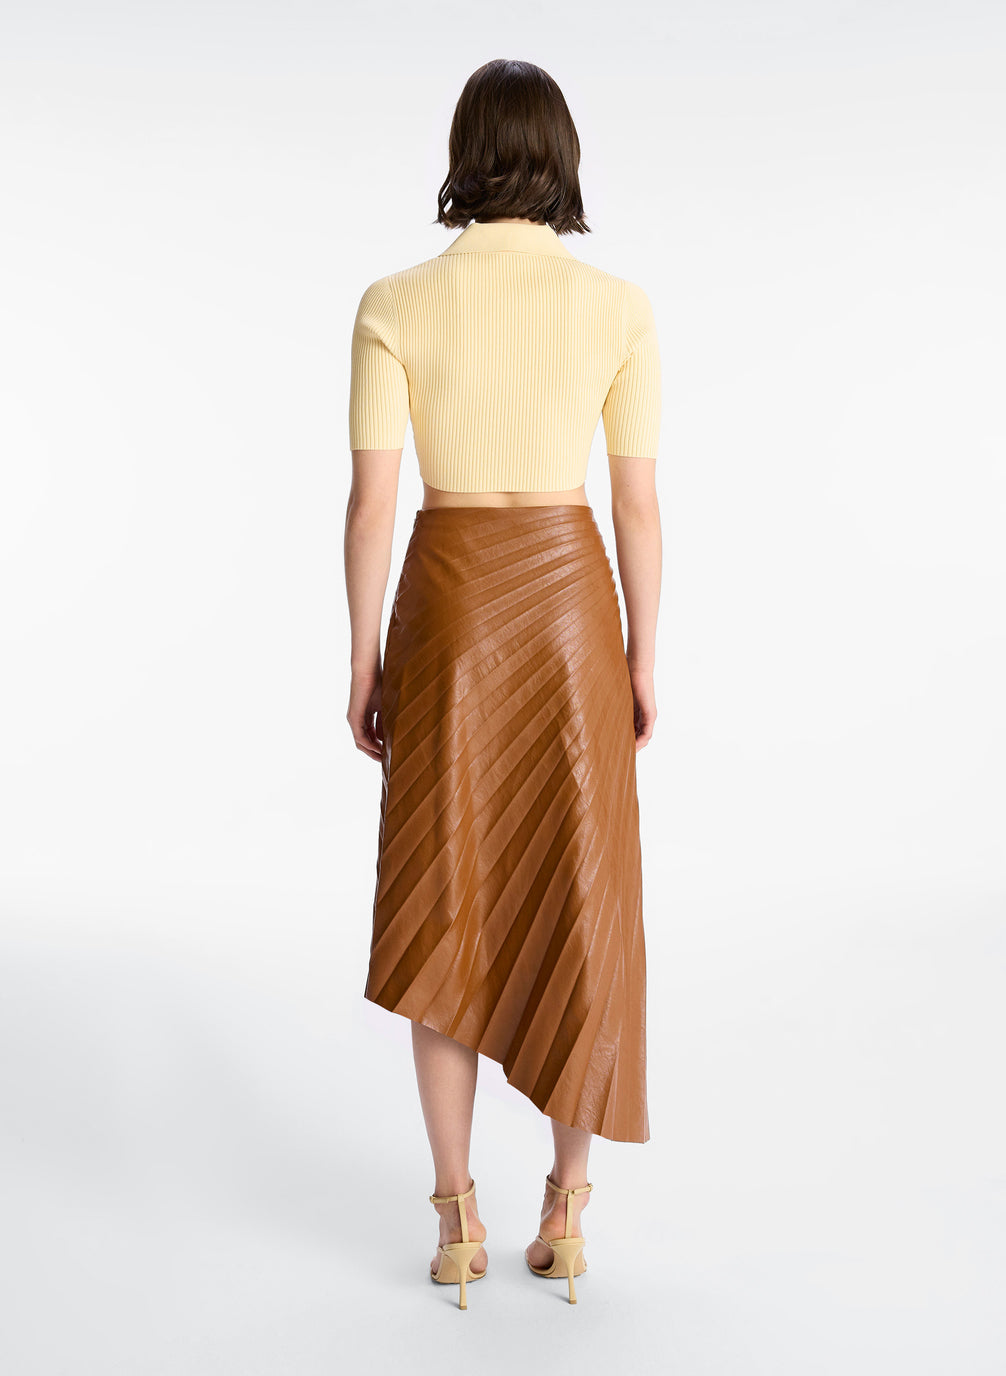 back view of woman wearing cream cropped collared knit shirt and brown pleated vegan leather skirt